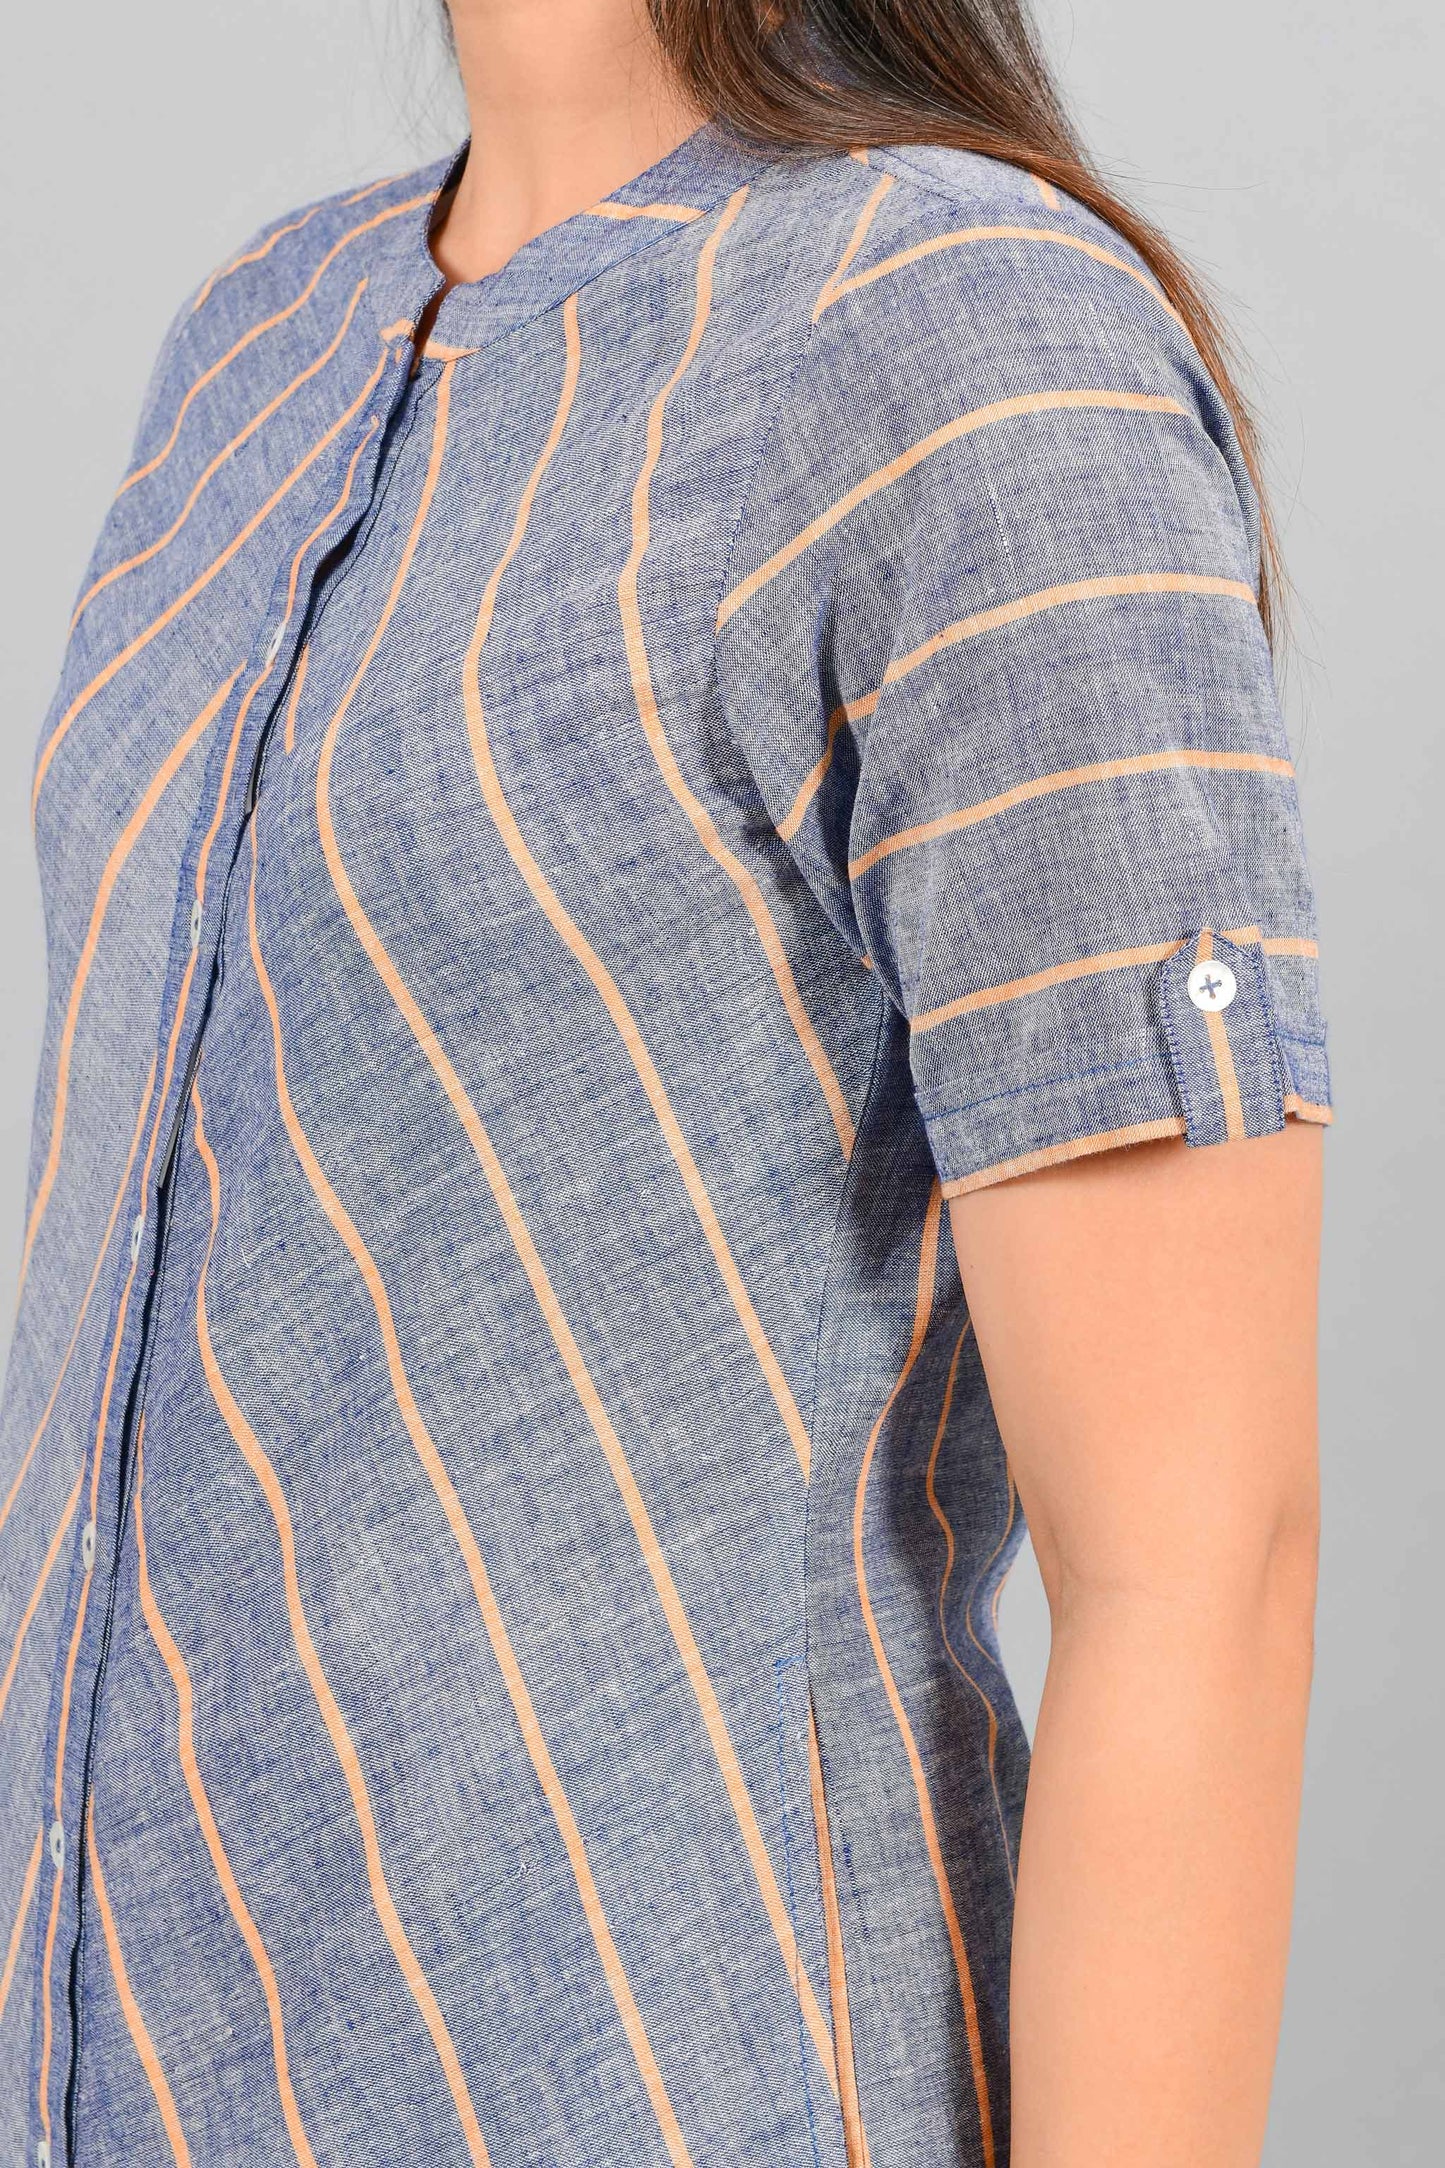 Close Up of an Indian female womenswear fashion model in a Blue chambray with orange stripes handspun and handwoven khadi cotton dress-kurta by Cotton Rack.